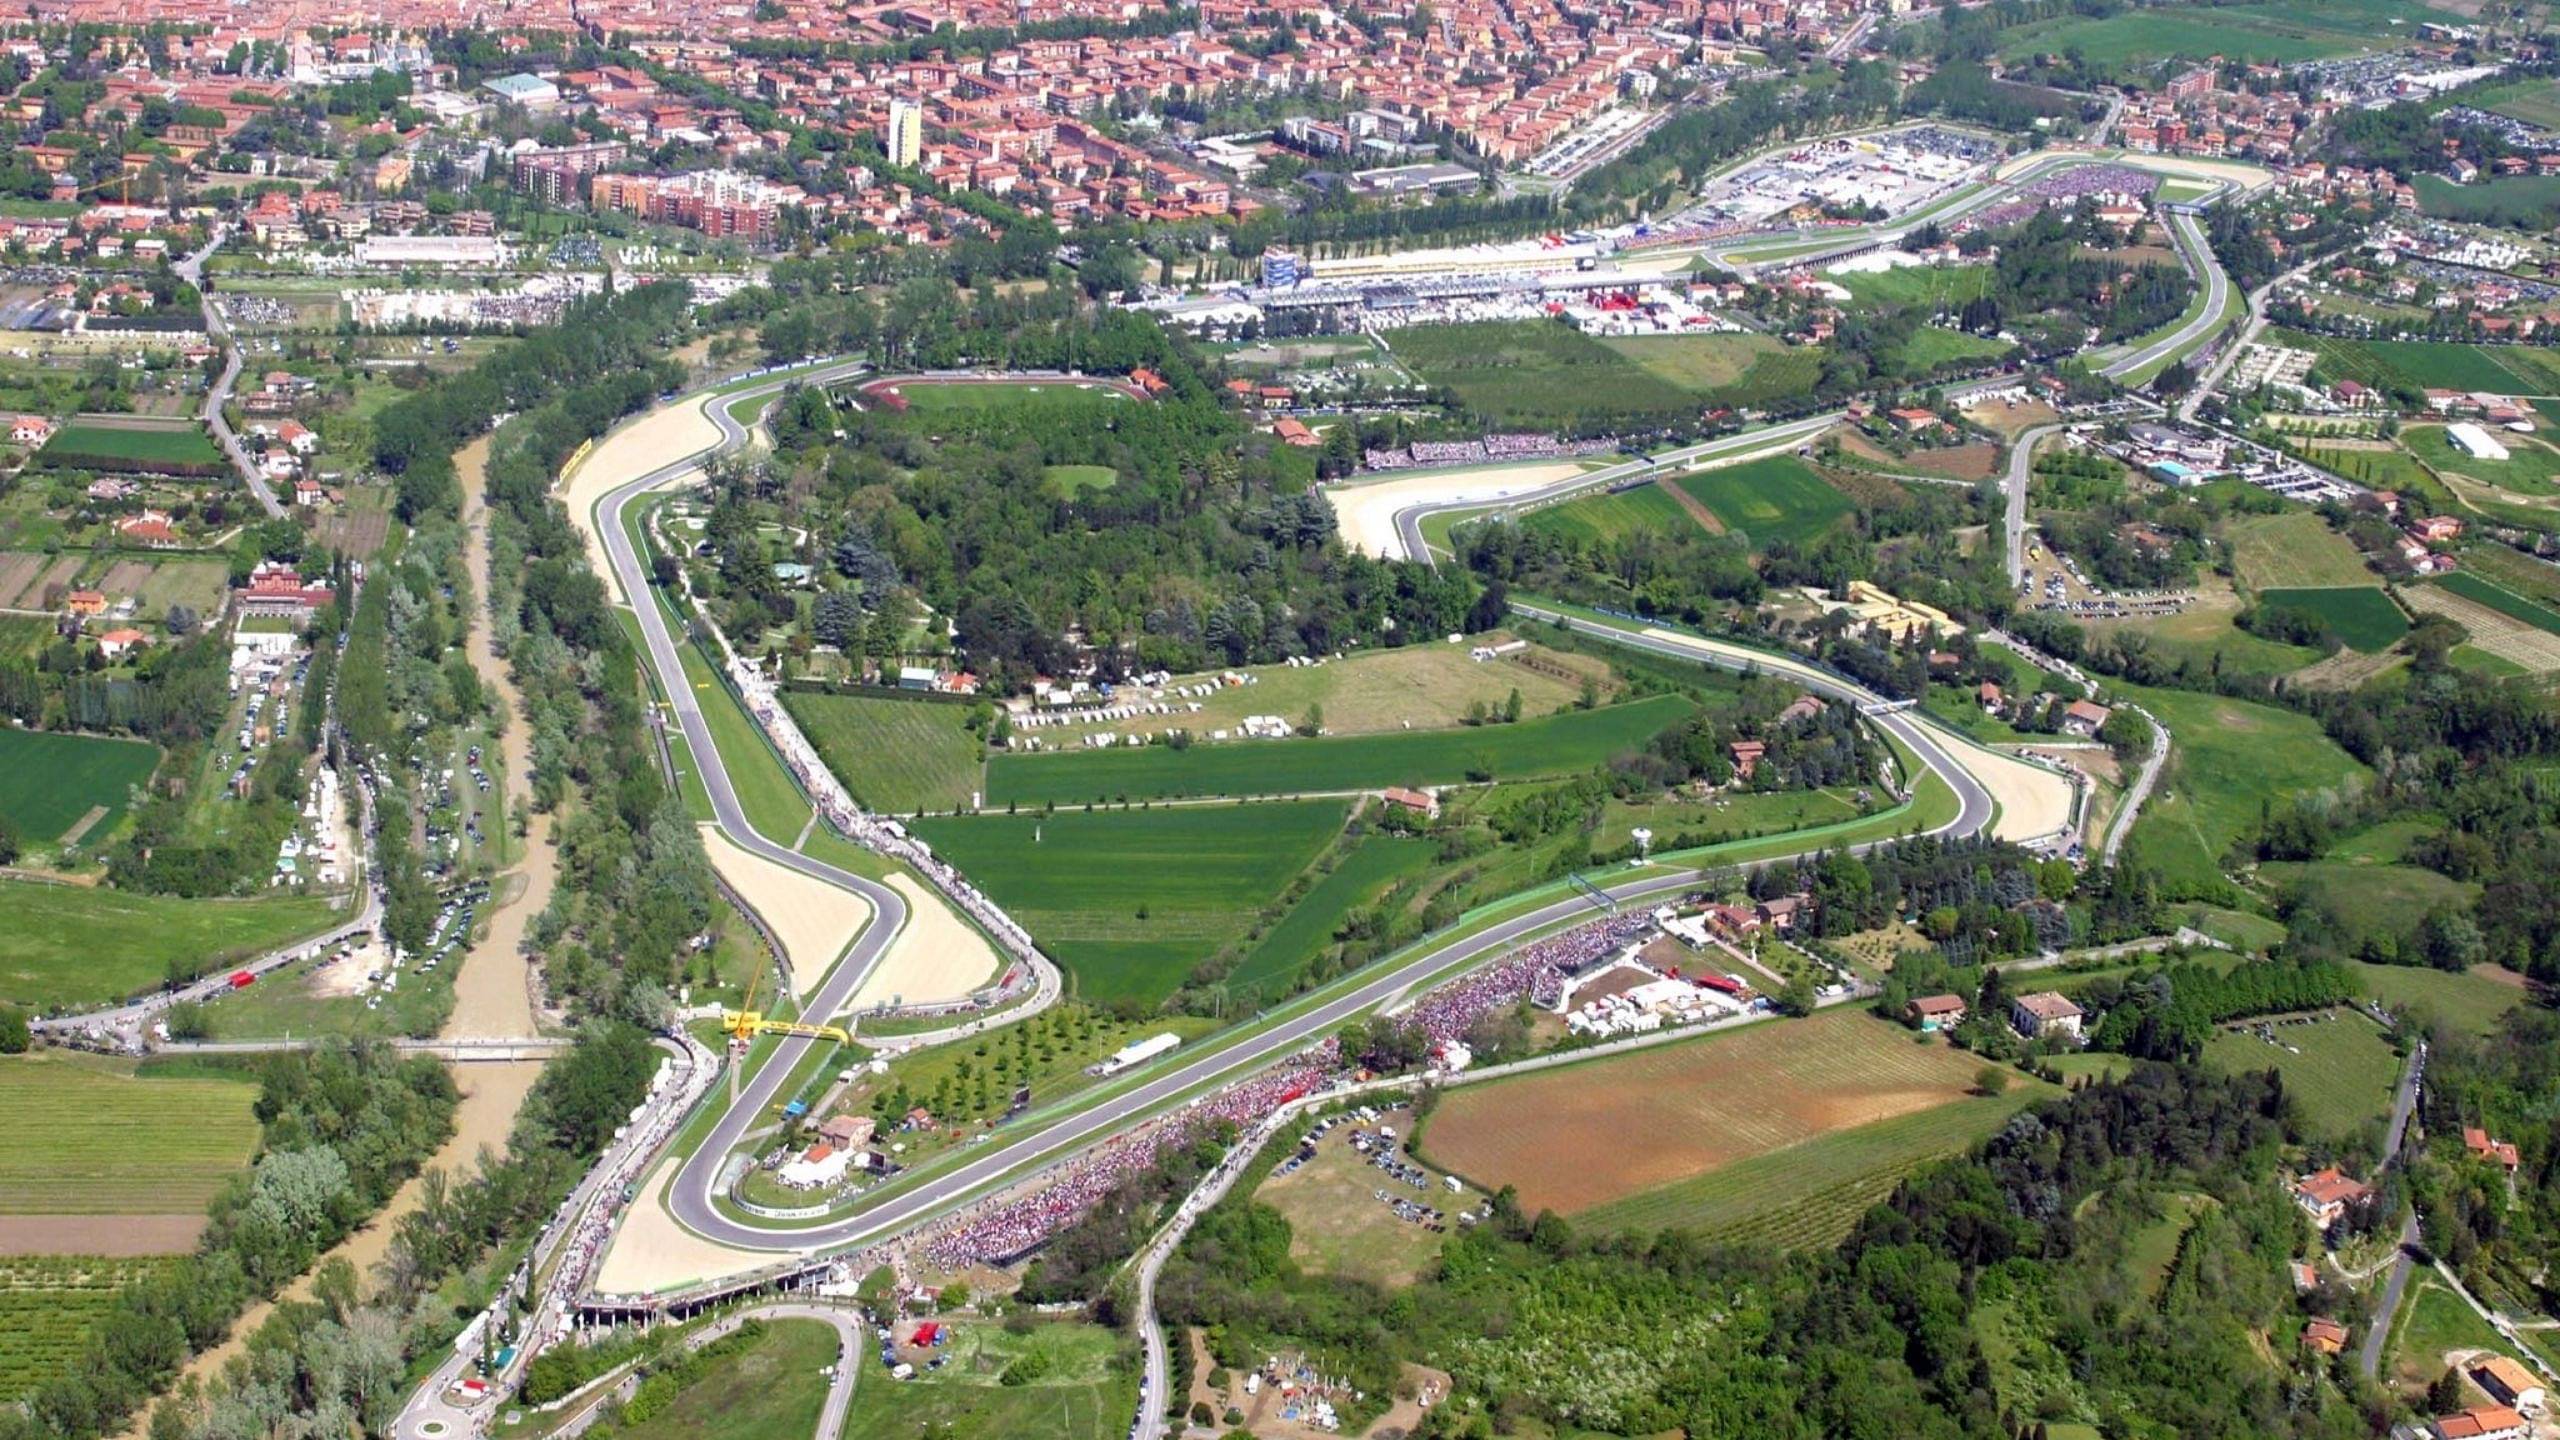 F1 Live Stream Emilia Romagna GP 2020, Start Time and Broadcast Channel When and Where to watch F1 Free Practice, Qualifying and Race held at Imola?